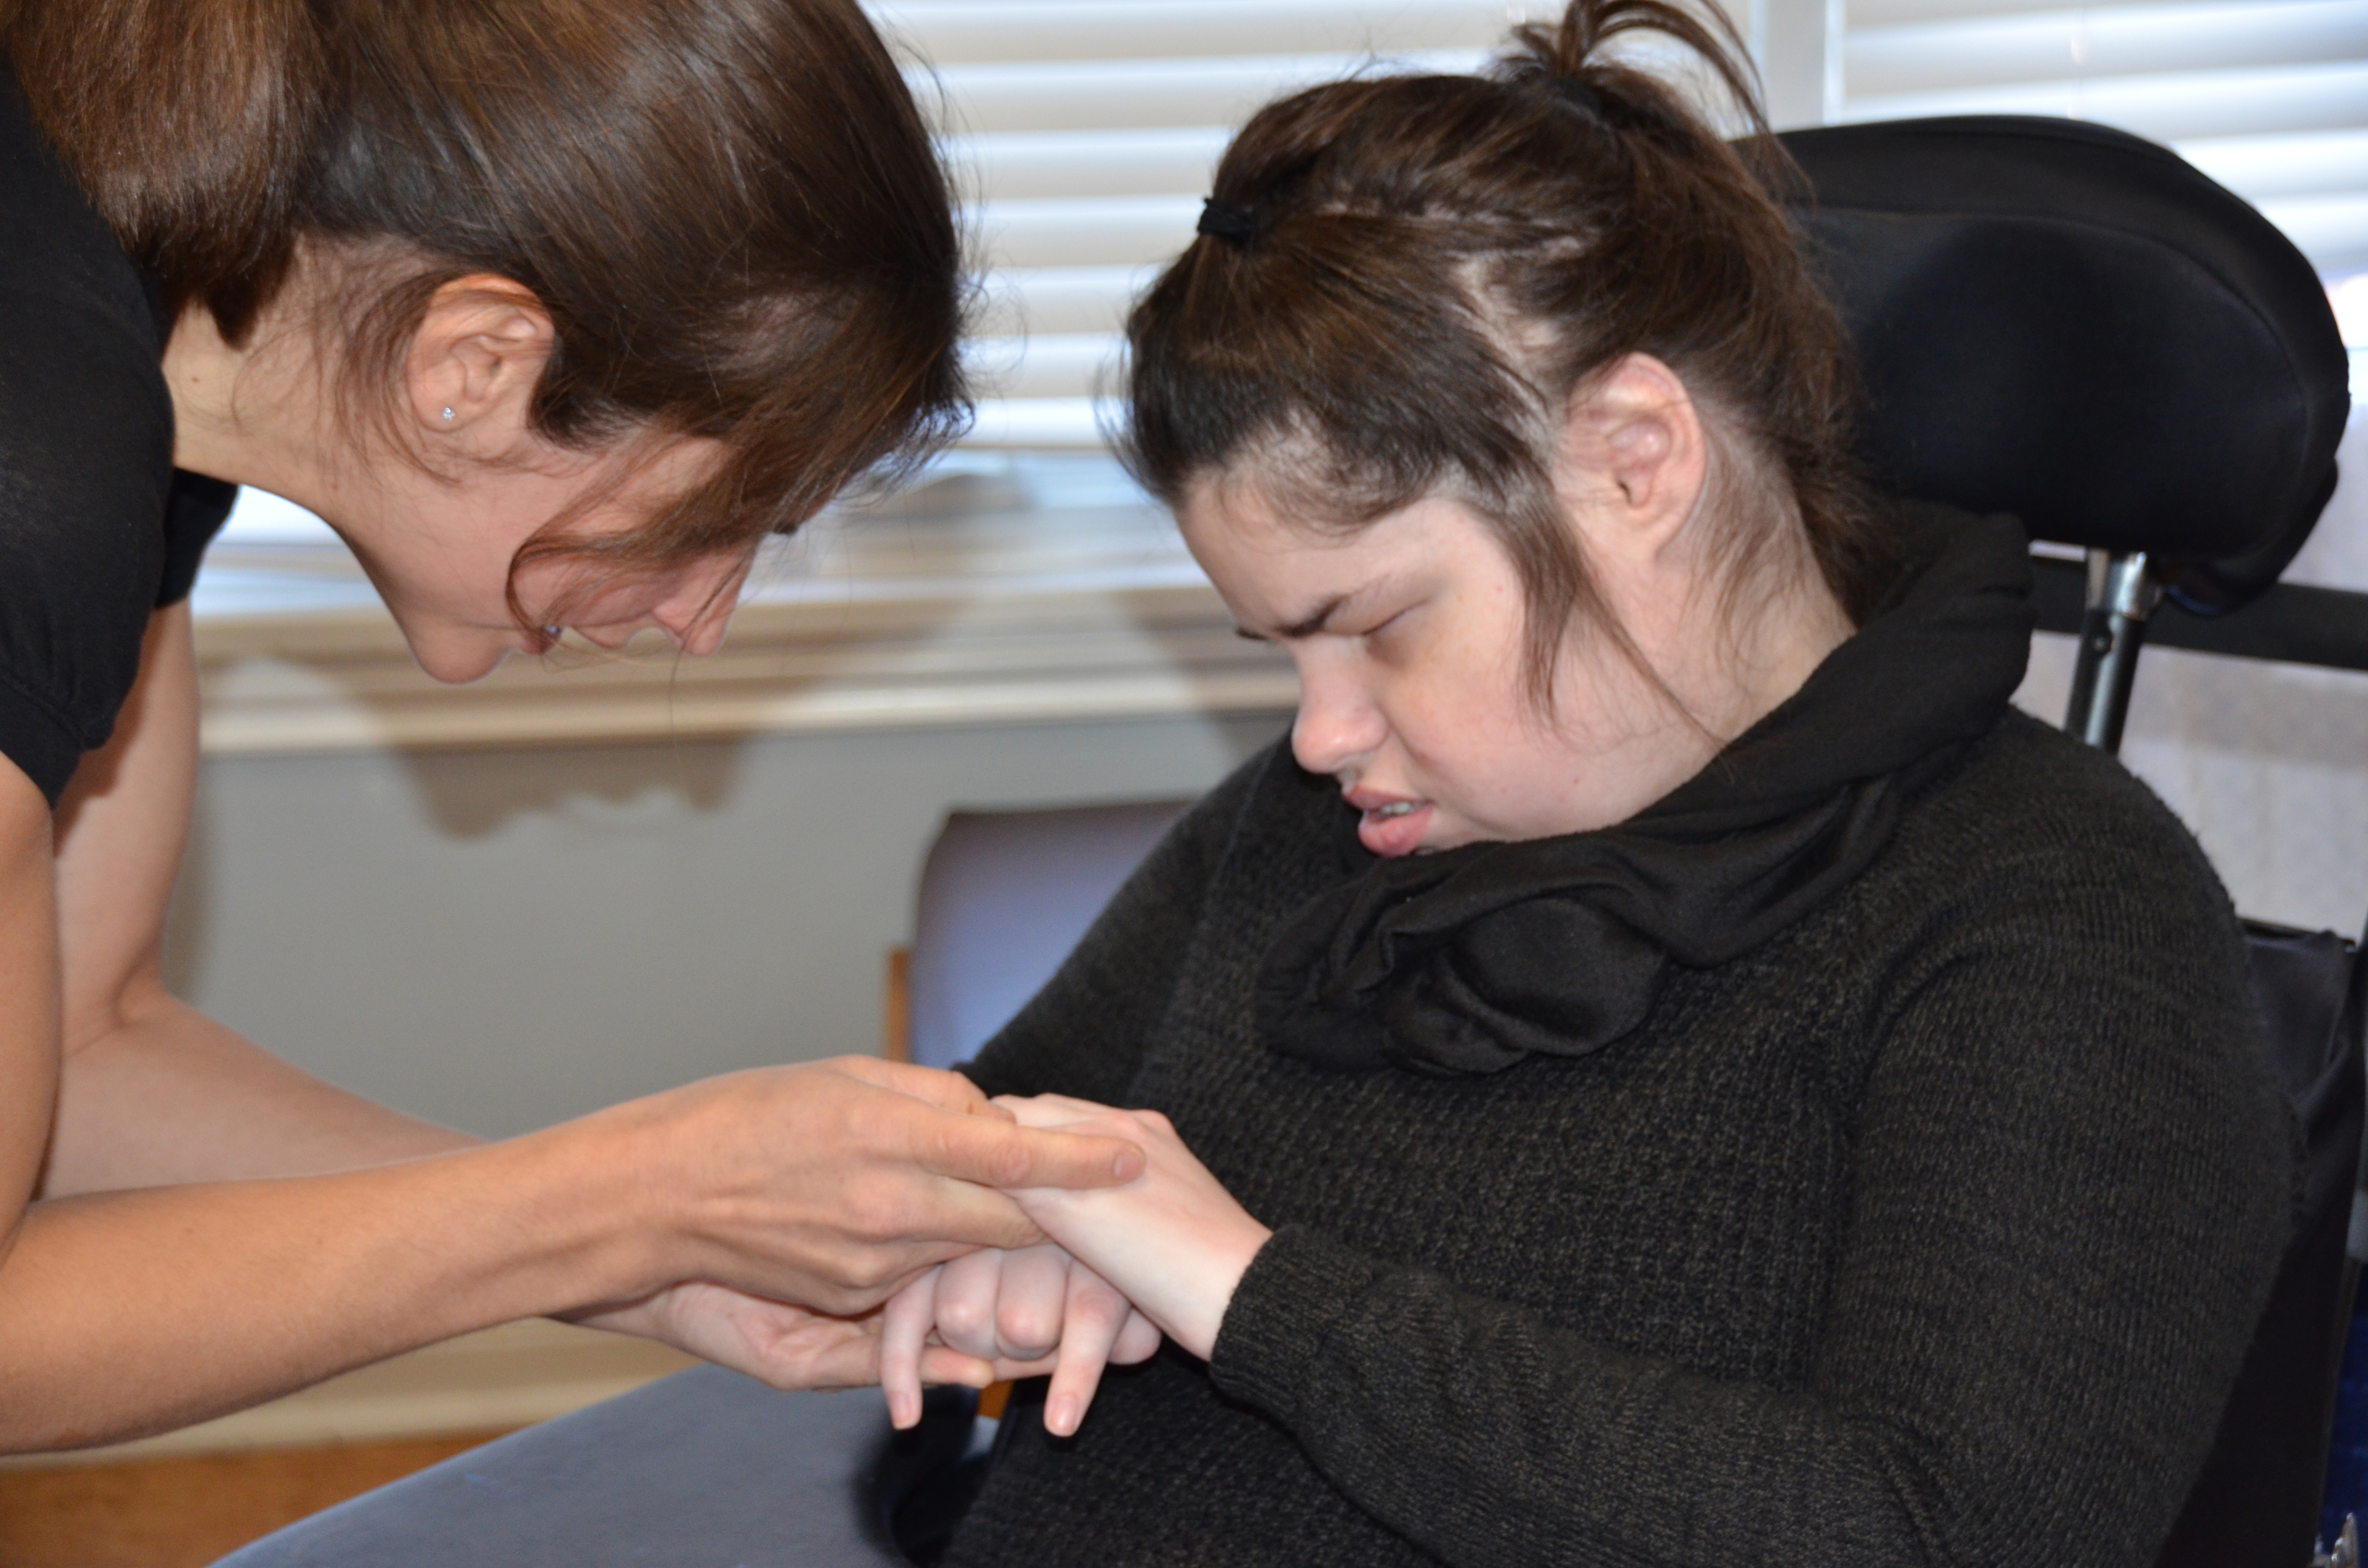 A woman with deafblindness in a wheelchair communicates with her intervenor using AITSL, a hand-over-hand sign language.